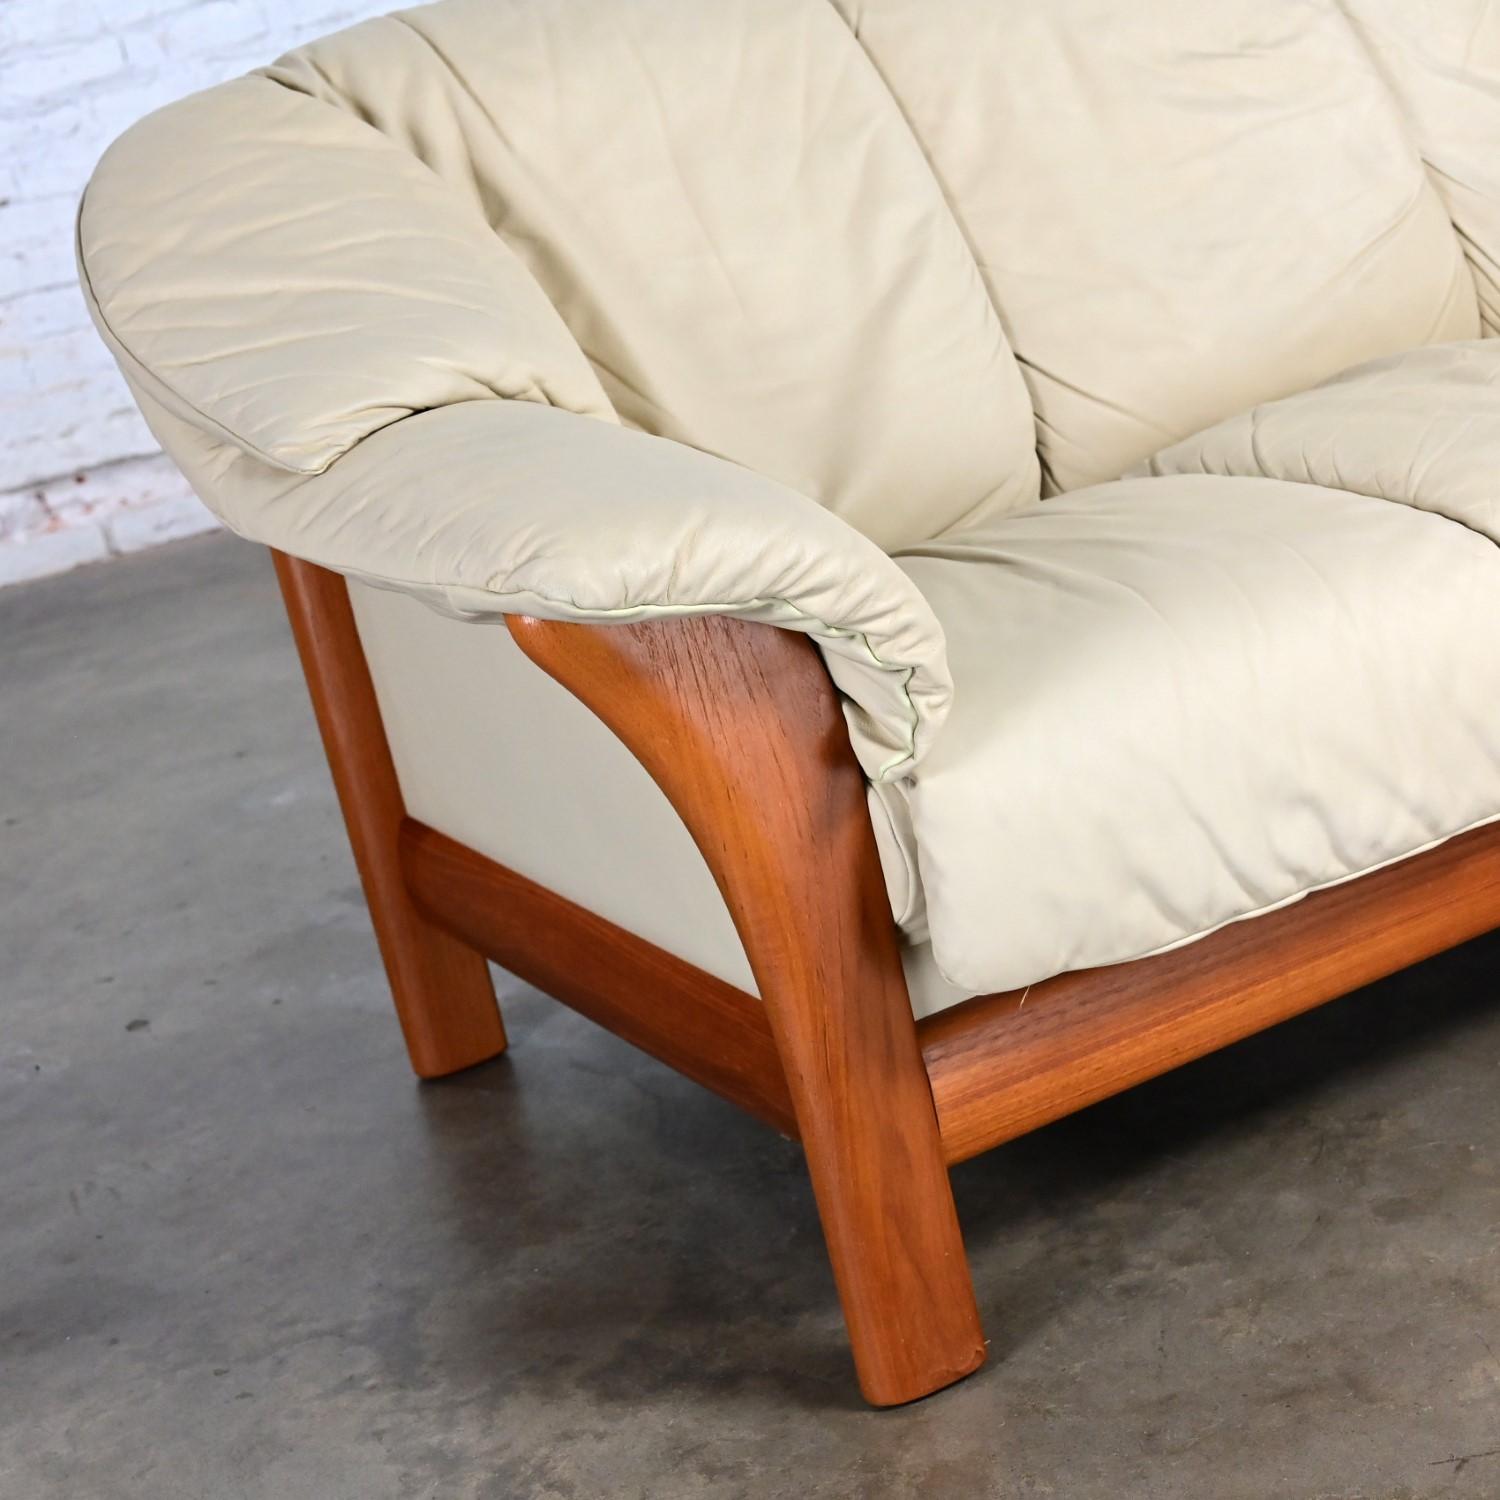 Scandinavian Modern Teak & Off White Leather Small Sofa Attributed to Ekornes For Sale 6